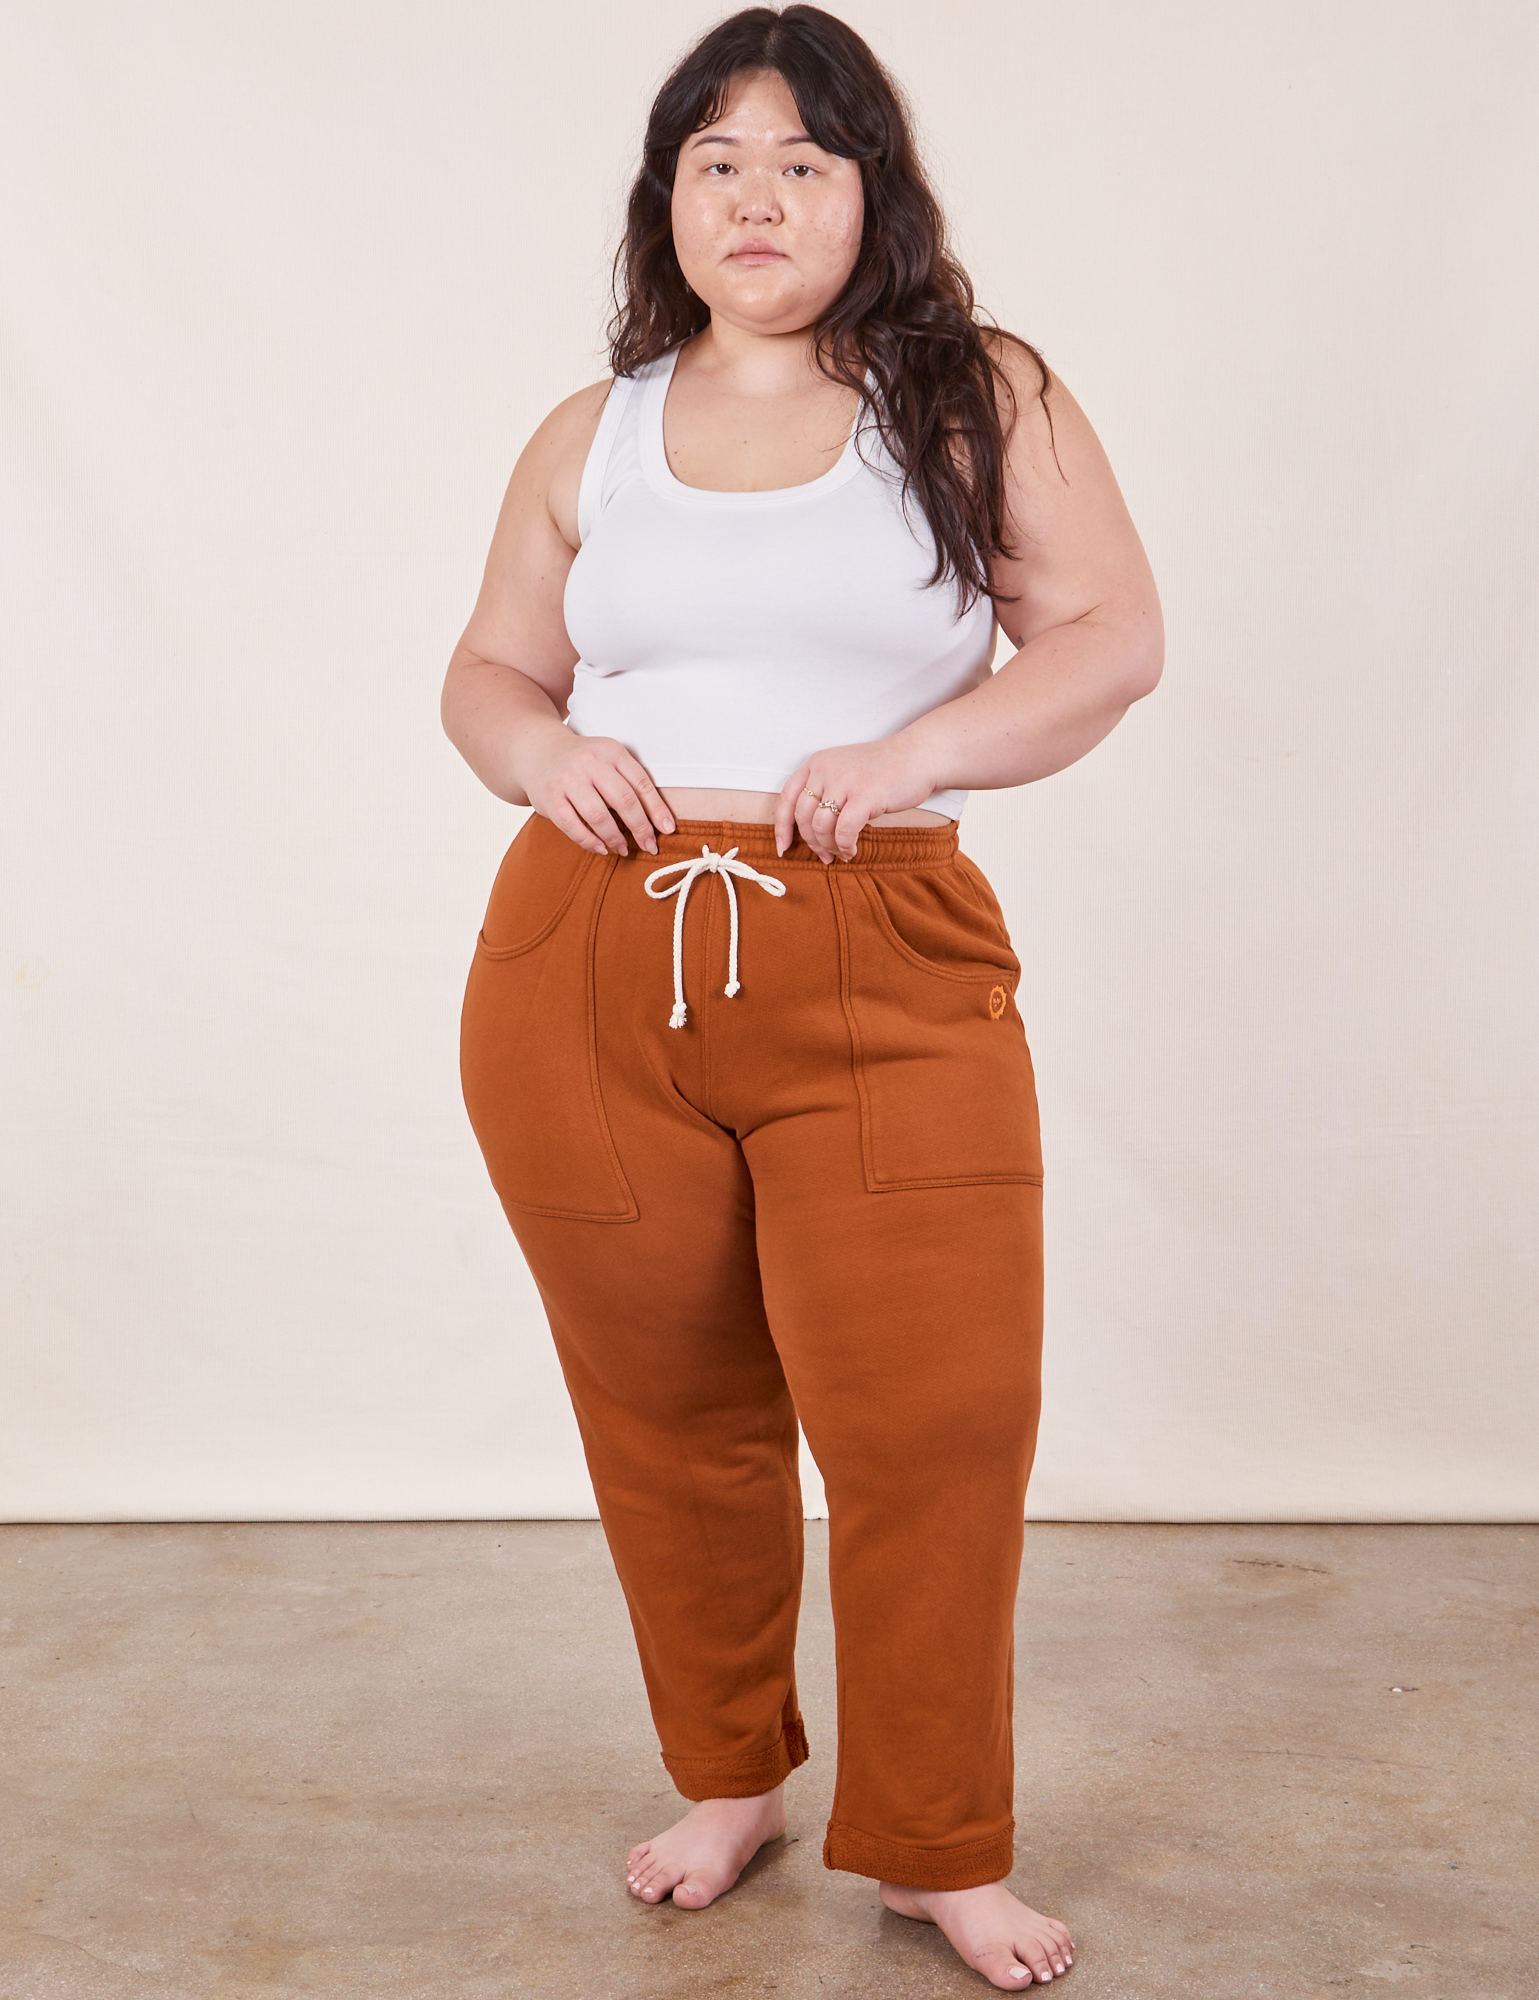 Ashley is 5&#39;7&quot; and wearing XL Cropped Rolled Cuff Sweatpants in Burnt Terracotta paired with vintage off-white Cropped Tank Top